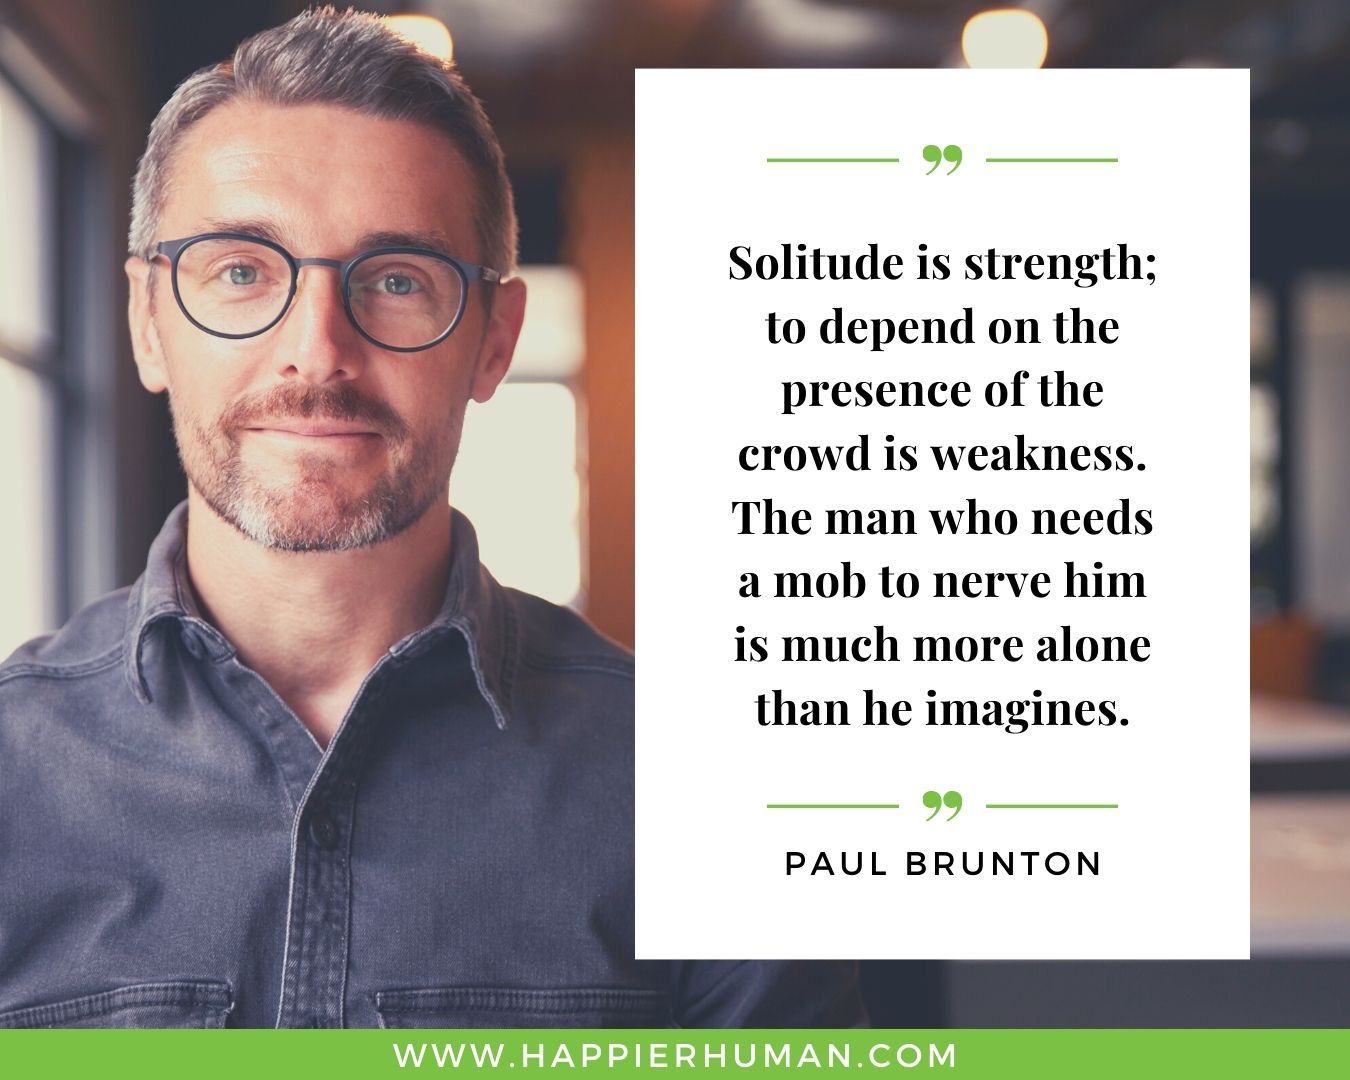 Loneliness Quotes - “Solitude is strength; to depend on the presence of the crowd is weakness. The man who needs a mob to nerve him is much more alone than he imagines.”– Paul Brunton